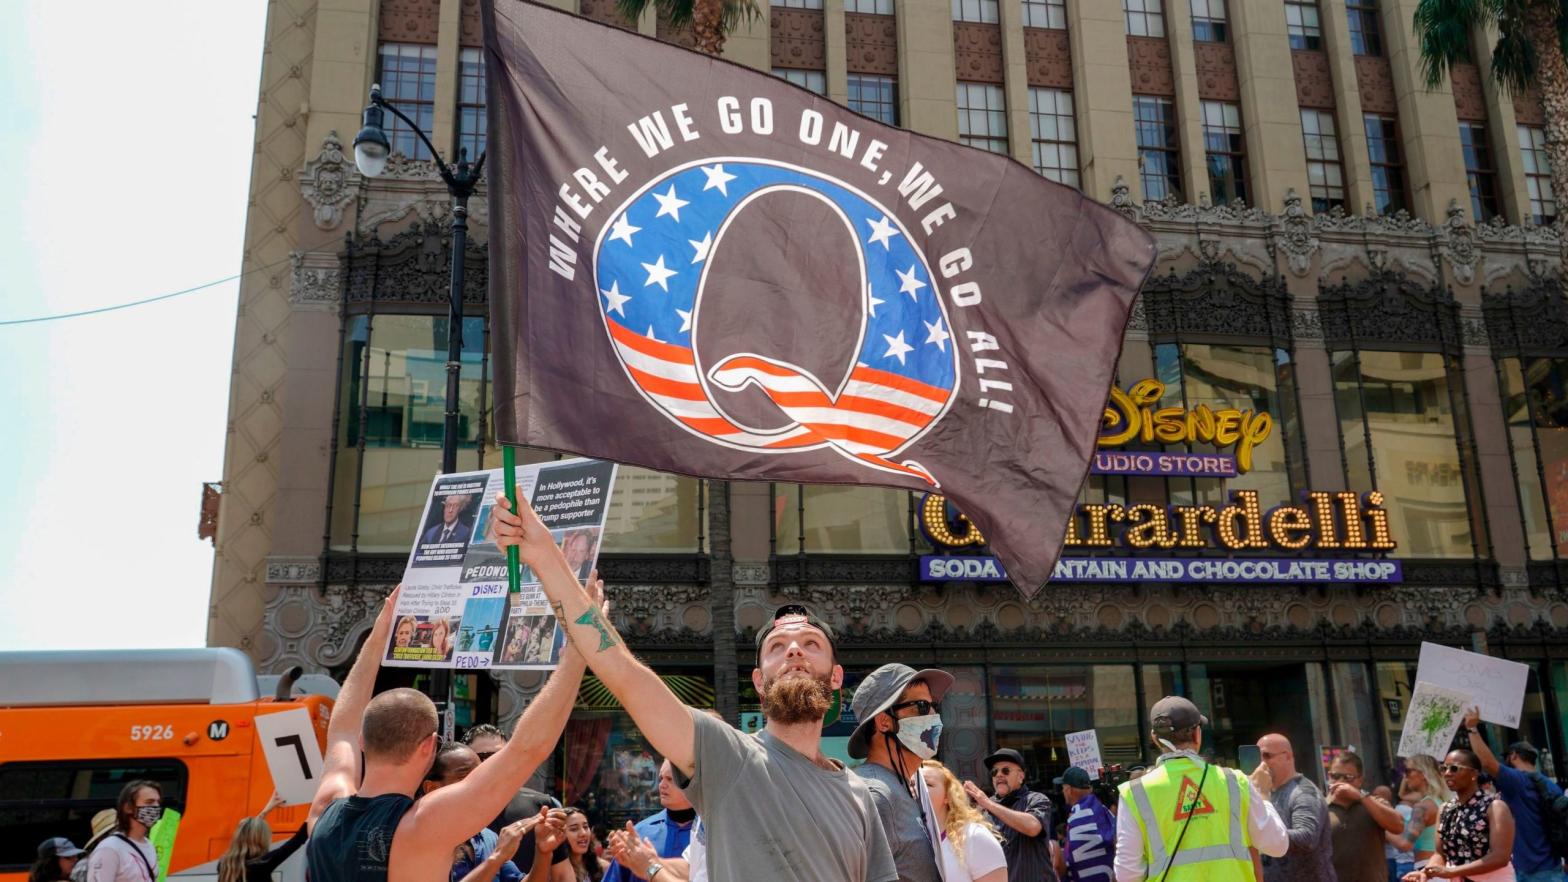 Conspiracy theorist QAnon demonstrators protest child trafficking, an issue the group has co-opted to recruit new members through hashtags like #savethechildren, on Hollywood Boulevard in Los Angeles, California, August 22, 2020.  (Photo:  Kyle Grillot, Getty Images)